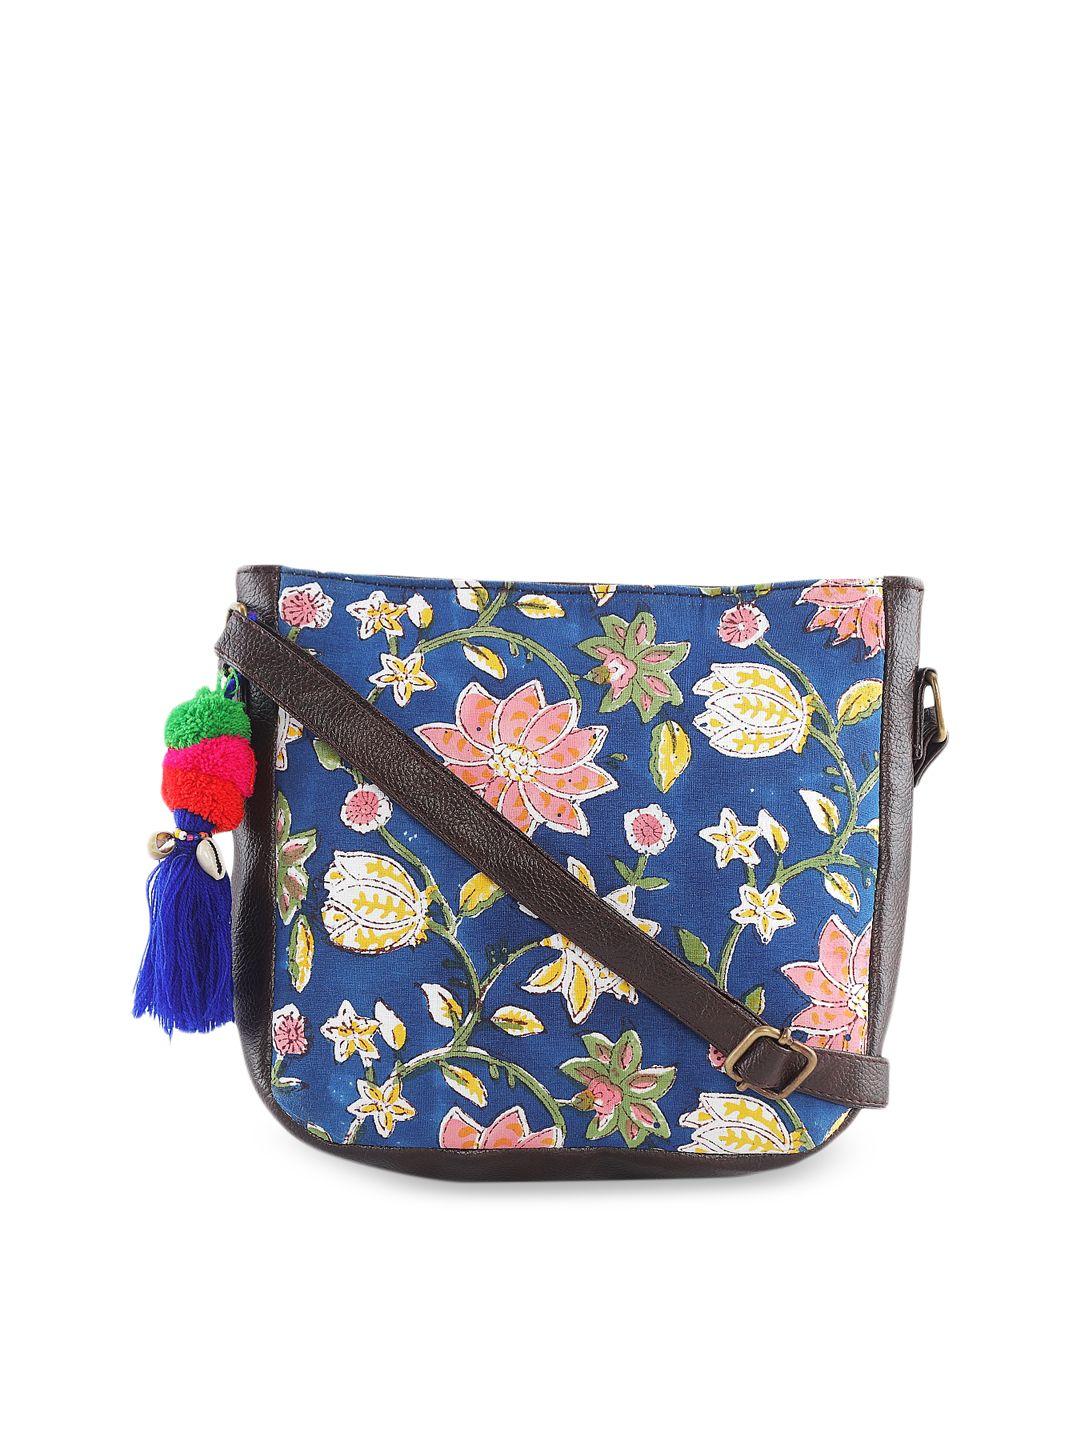 nepri floral printed structured sling bag with tasselled